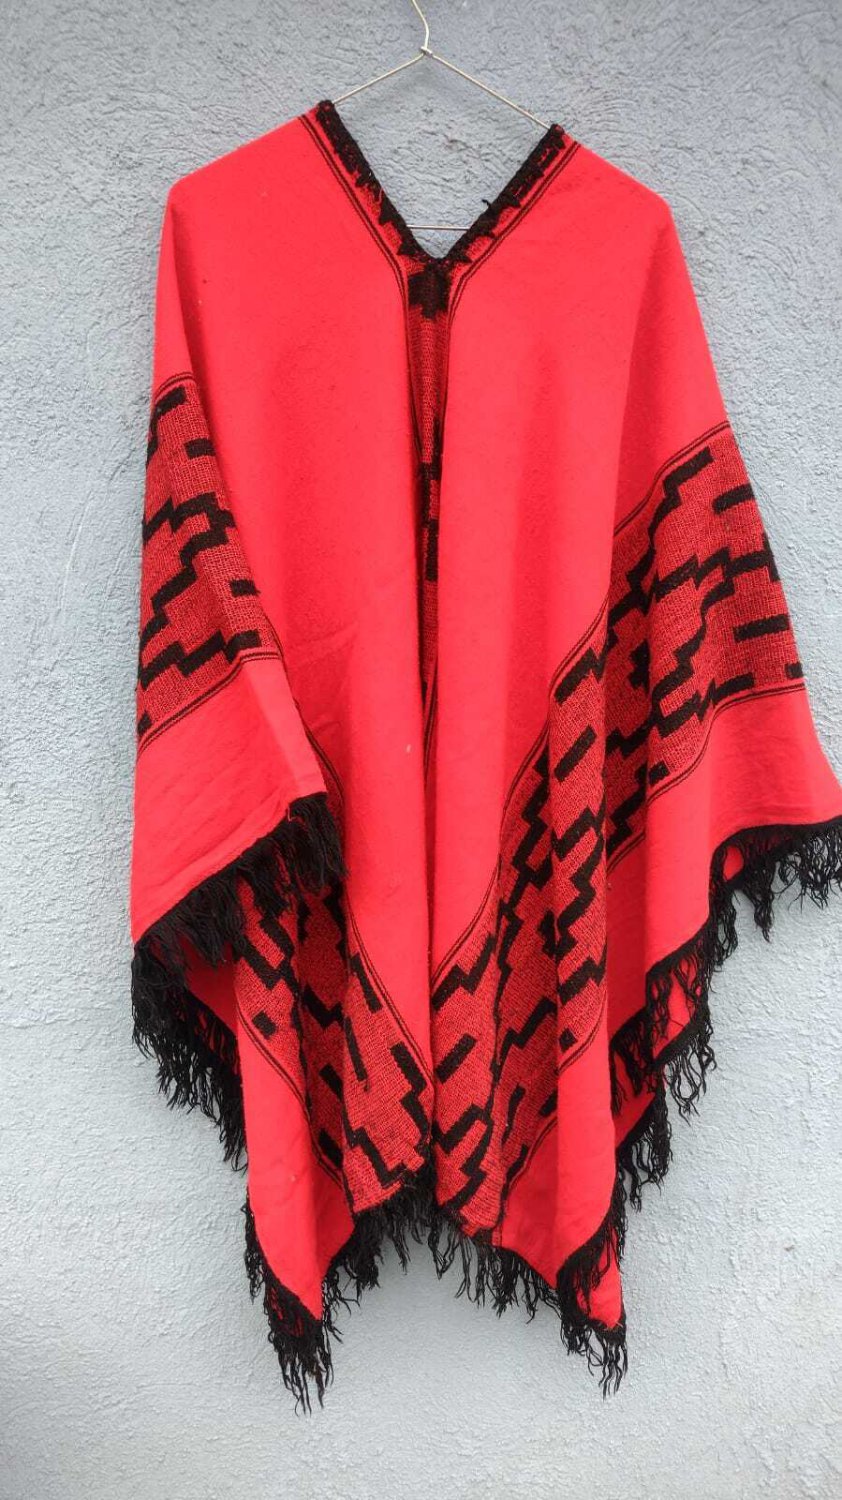 old red poncho cape typical Argentine gaucho, from the north of ...